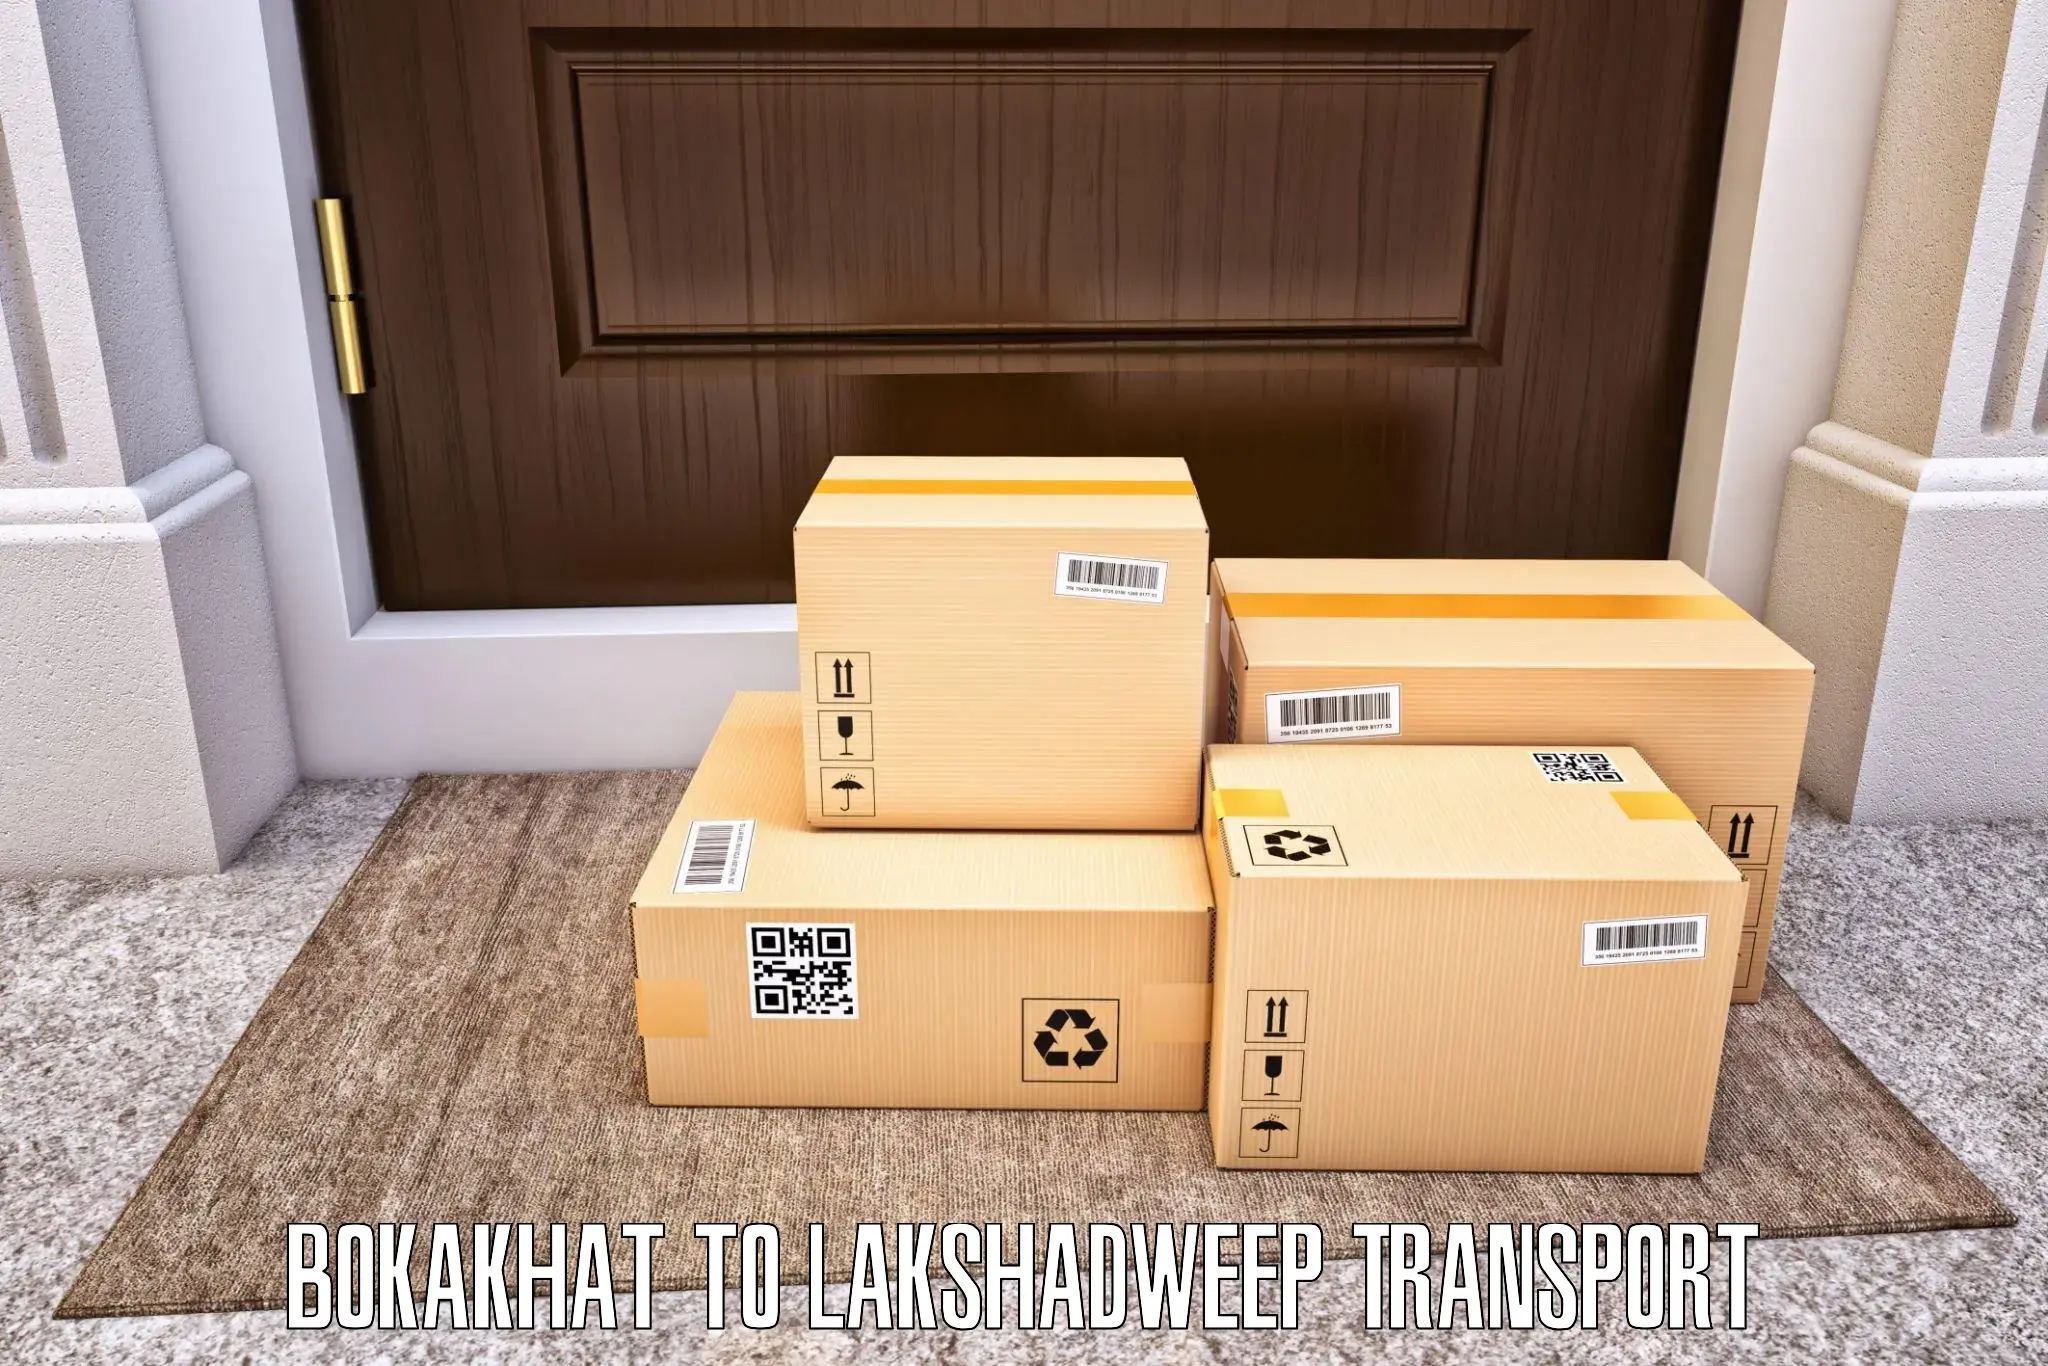 Material transport services Bokakhat to Lakshadweep